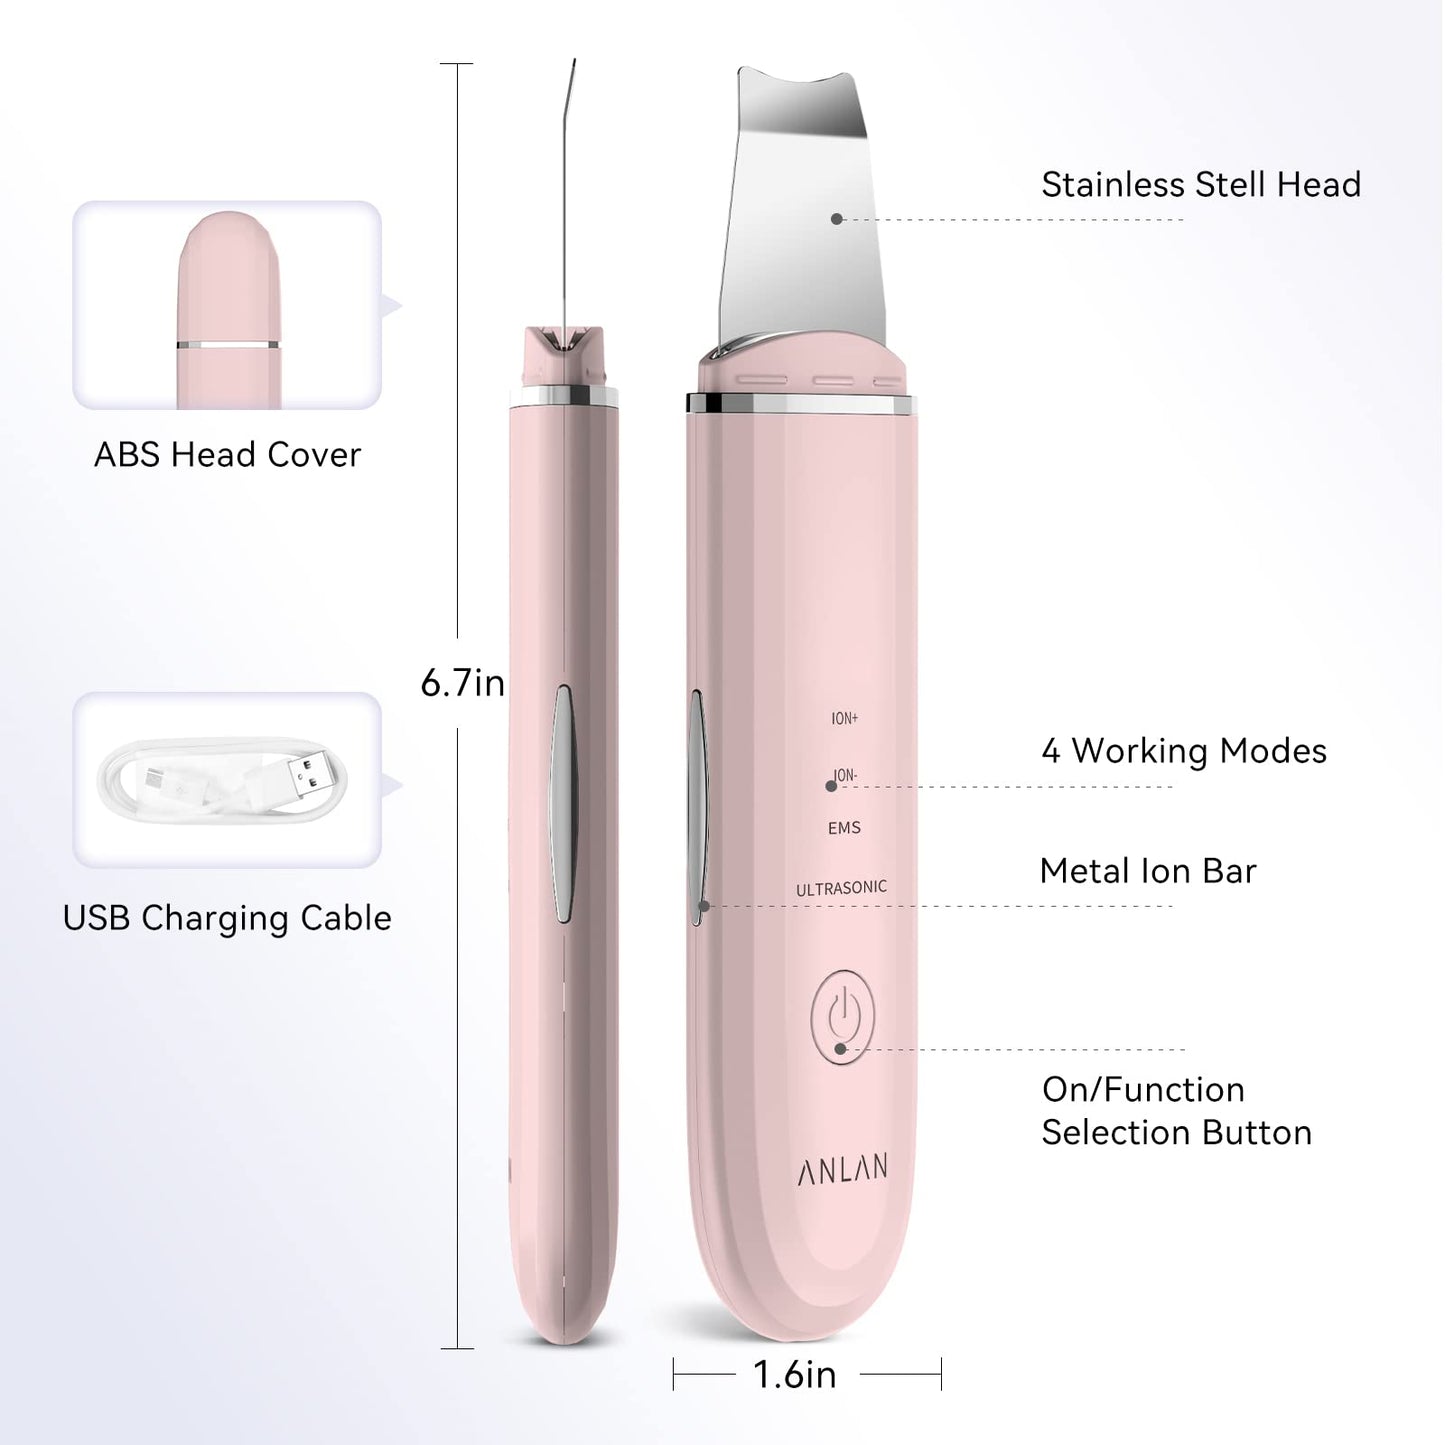 ANLAN Facial Skin Scrubber,ANLAN Electric Ultrasonic EMS Ion Face Cleanser Blackhead Remover Pores Cleaner Wrinkle Remover Comedone Extractor Skin Care Massager USB Rechargeable Beauty Tool (pink)